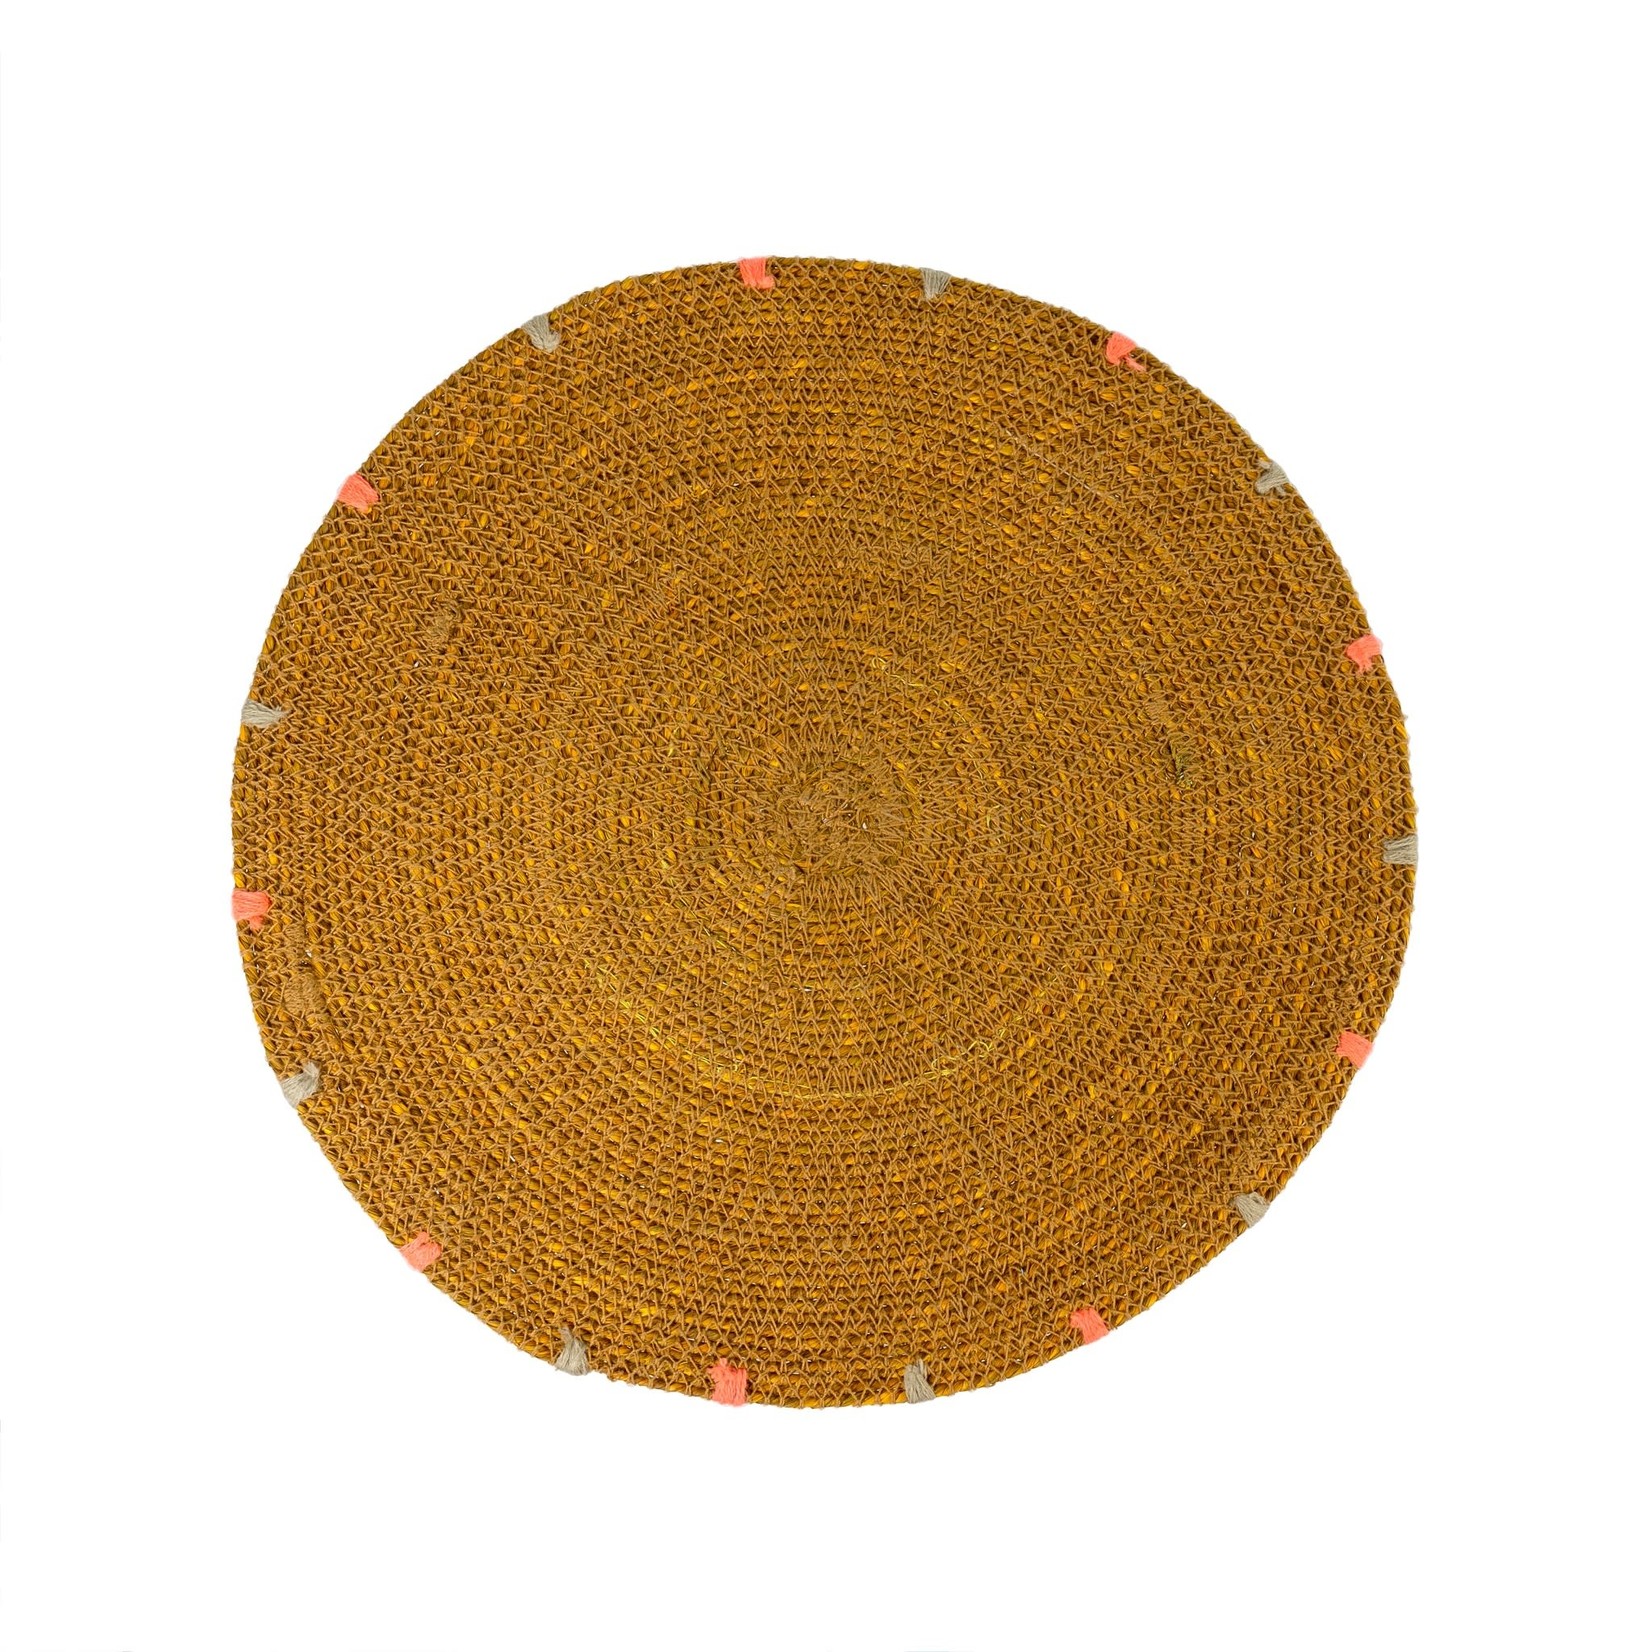 Indaba Cassia Seagrass Placemat - Amber